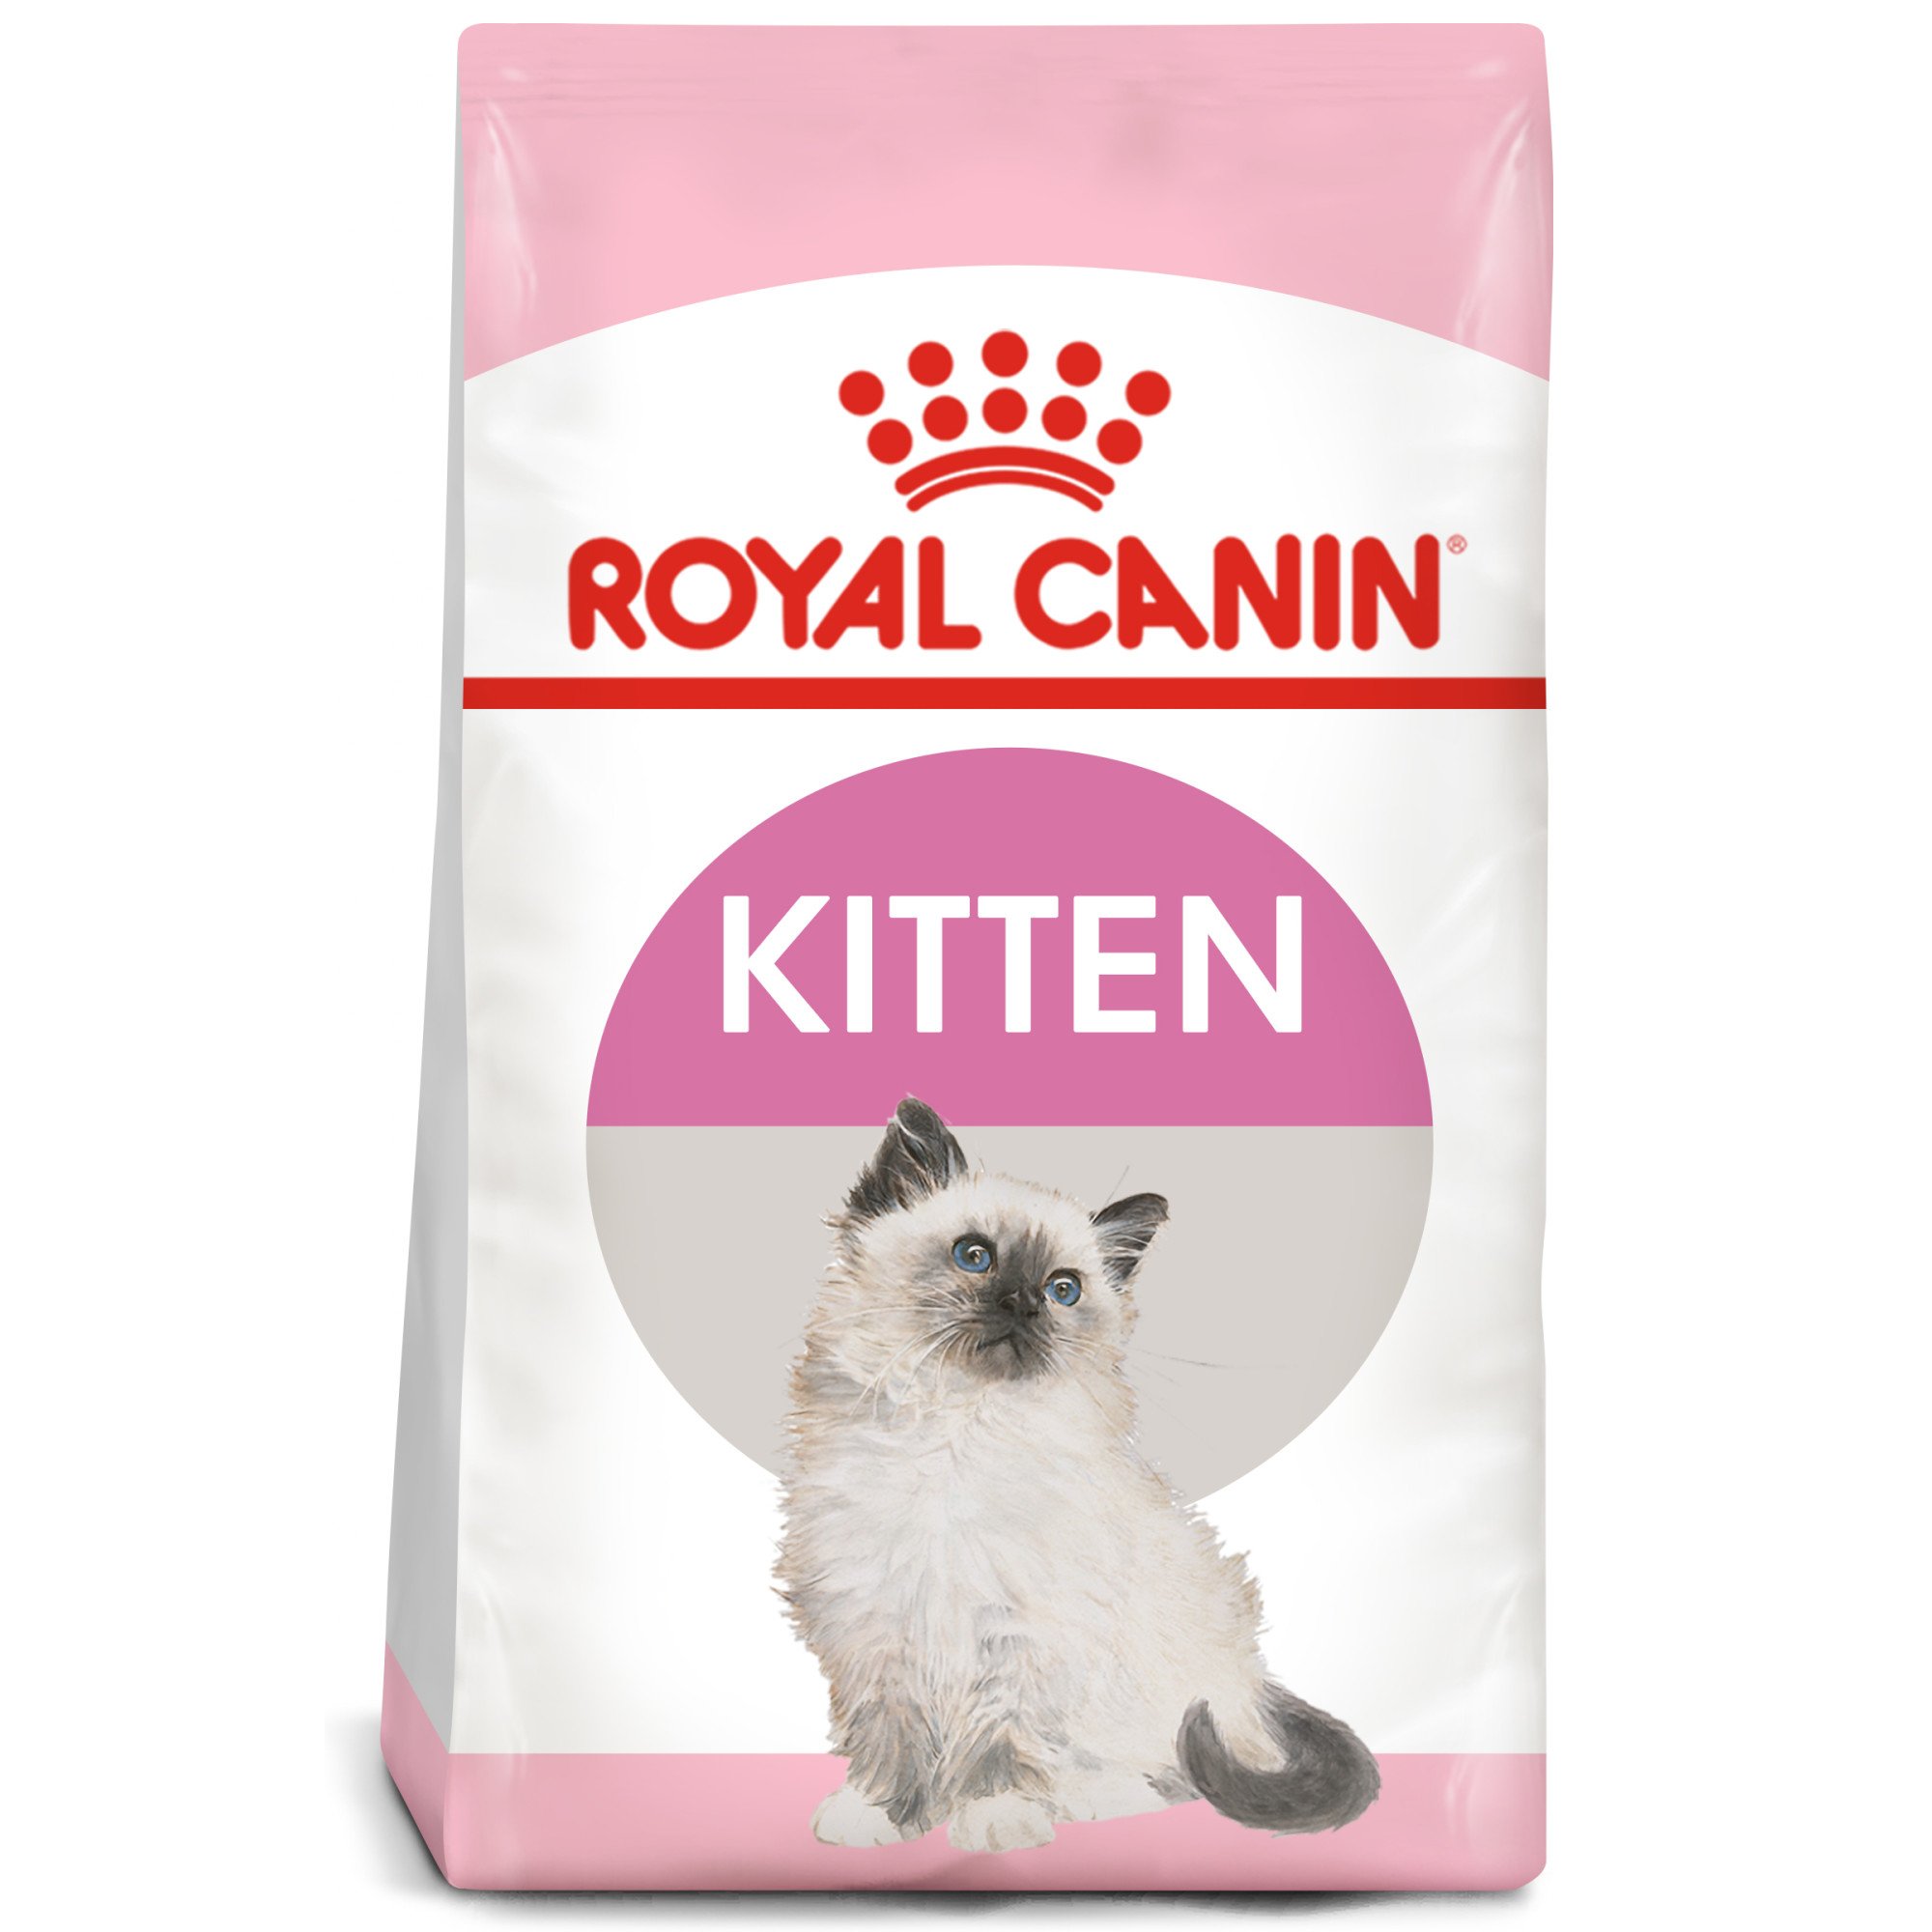 Royal Canin Feline Health Nutrition Dry Food for Young Kittens, 15 lbs